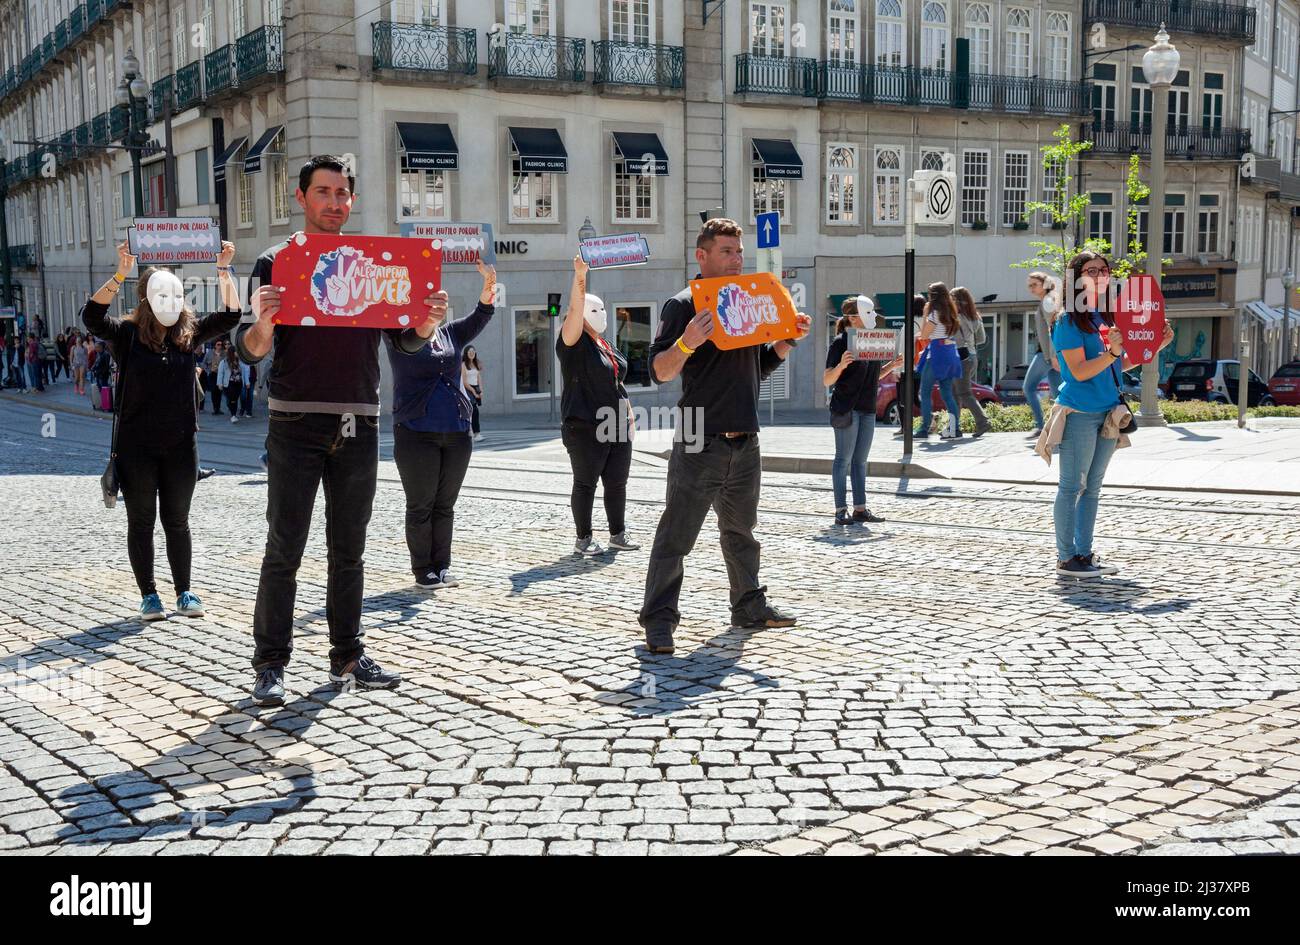 Europe, Portugal, Porto, Praca da Liberdade, Demonstration by People Raising awareness for Mental Health Issues on Pedestrian Crossing. Stock Photo